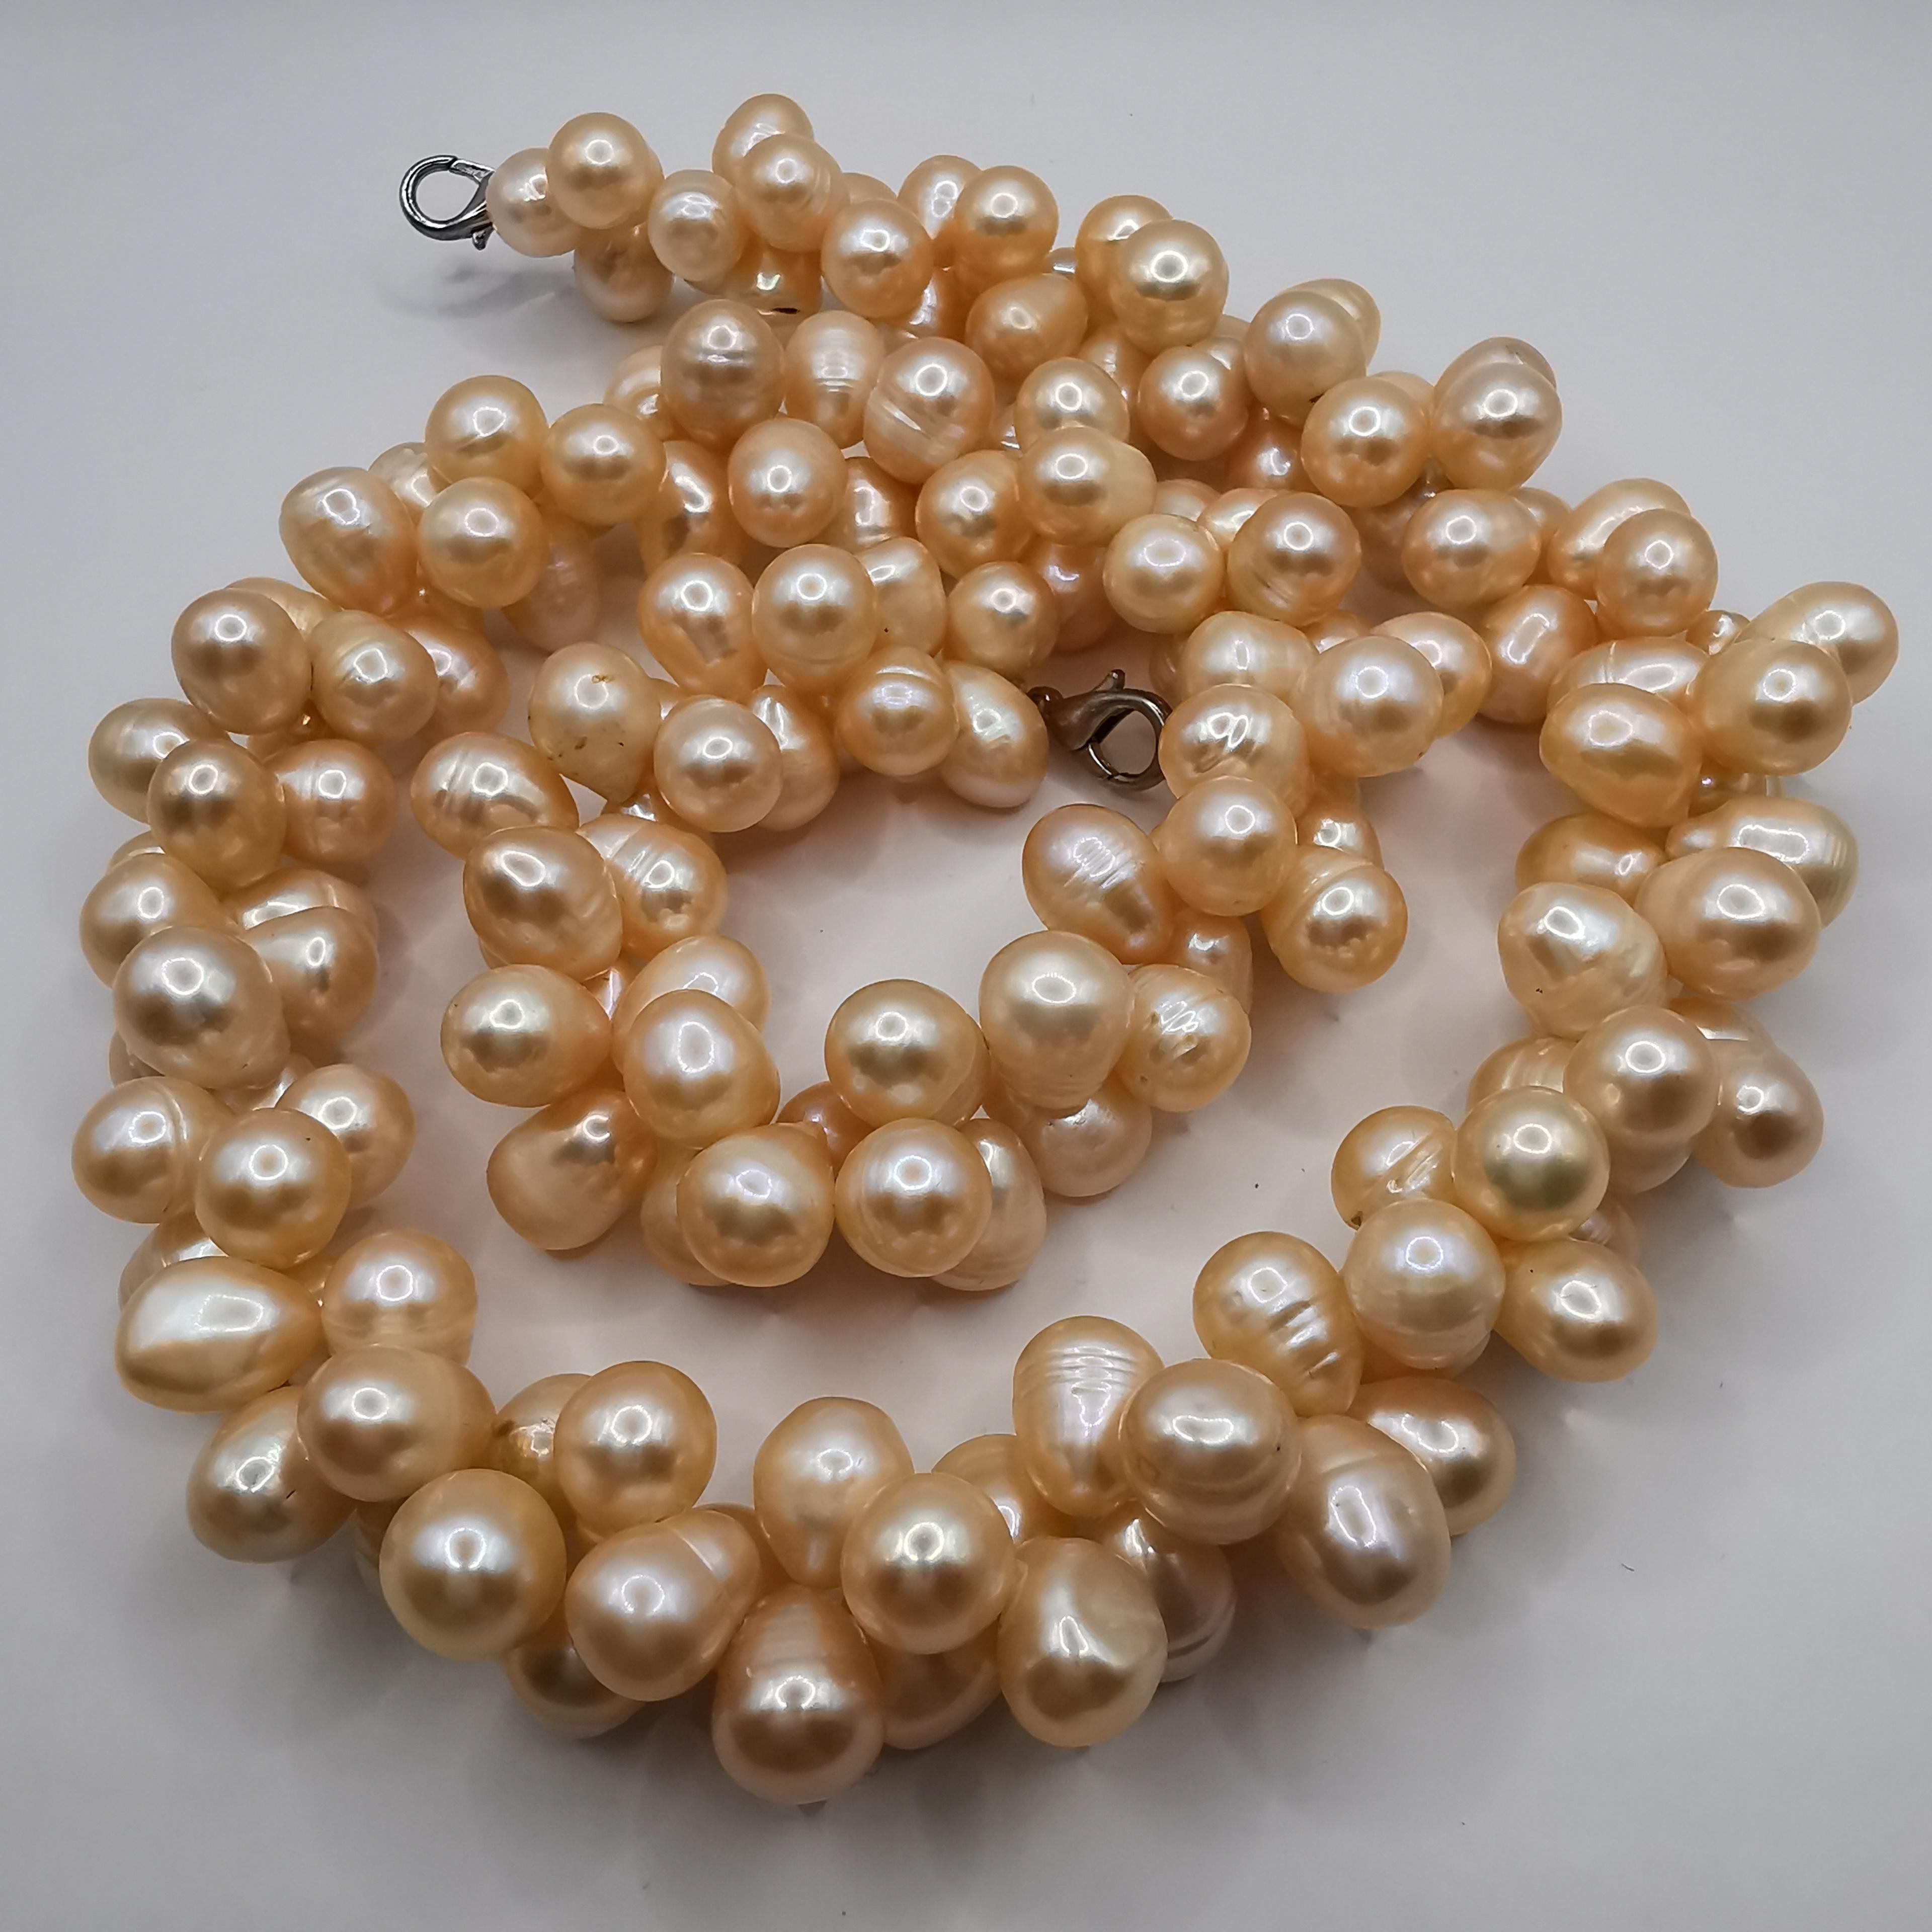 Uncut Dual Twisted Freshwater Cultured Baroque Peach Pearl Necklace For Sale